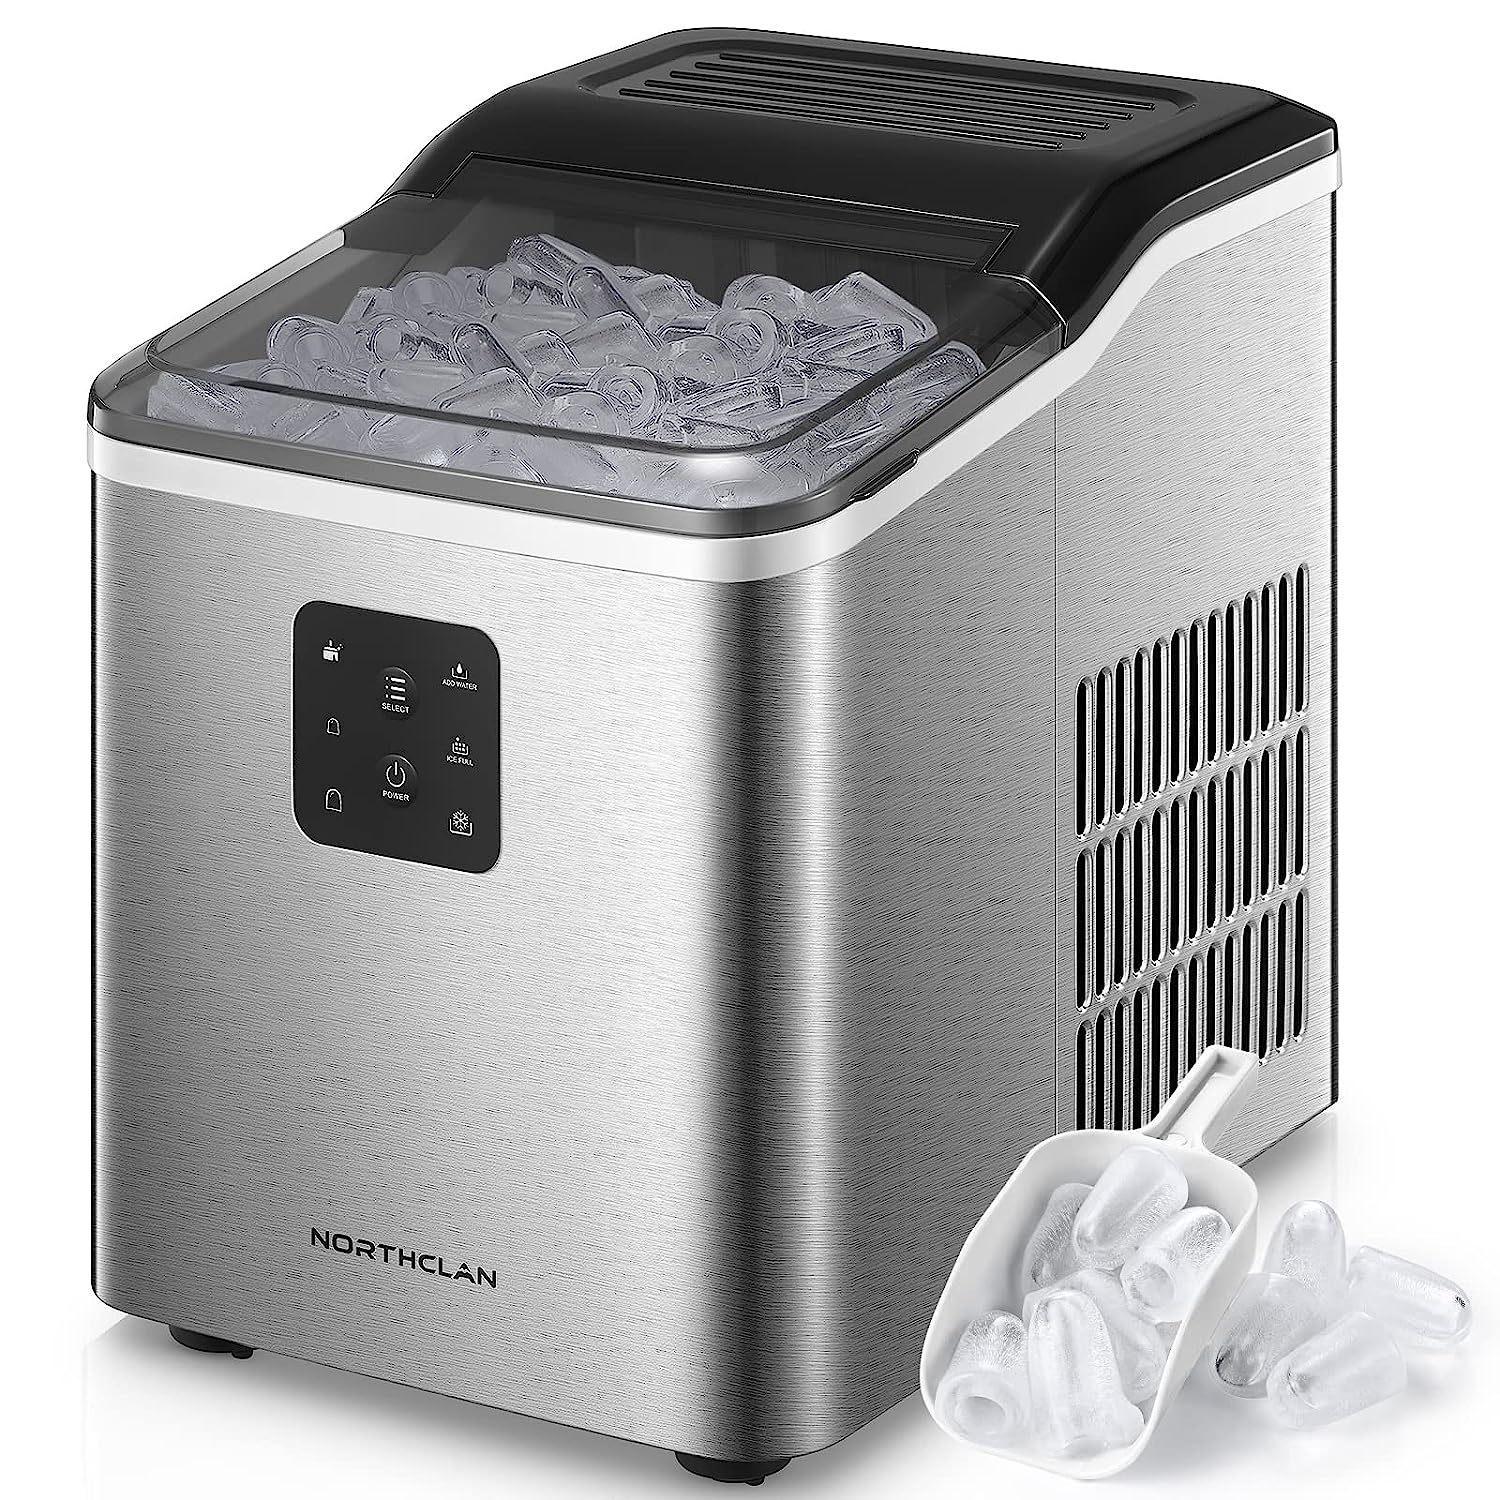 NORTHCLAN Ice Cube Machine 2 Ice Cube Sizes, 14 kg, 24 Pieces, 9 Ice Cubes in 5-8 Minutes, Self-Cleaning, LCD Display and 2L Water Tank, Ice Maker with Ice Scoop and Basket, Stainless Steel Ice Cube Maker